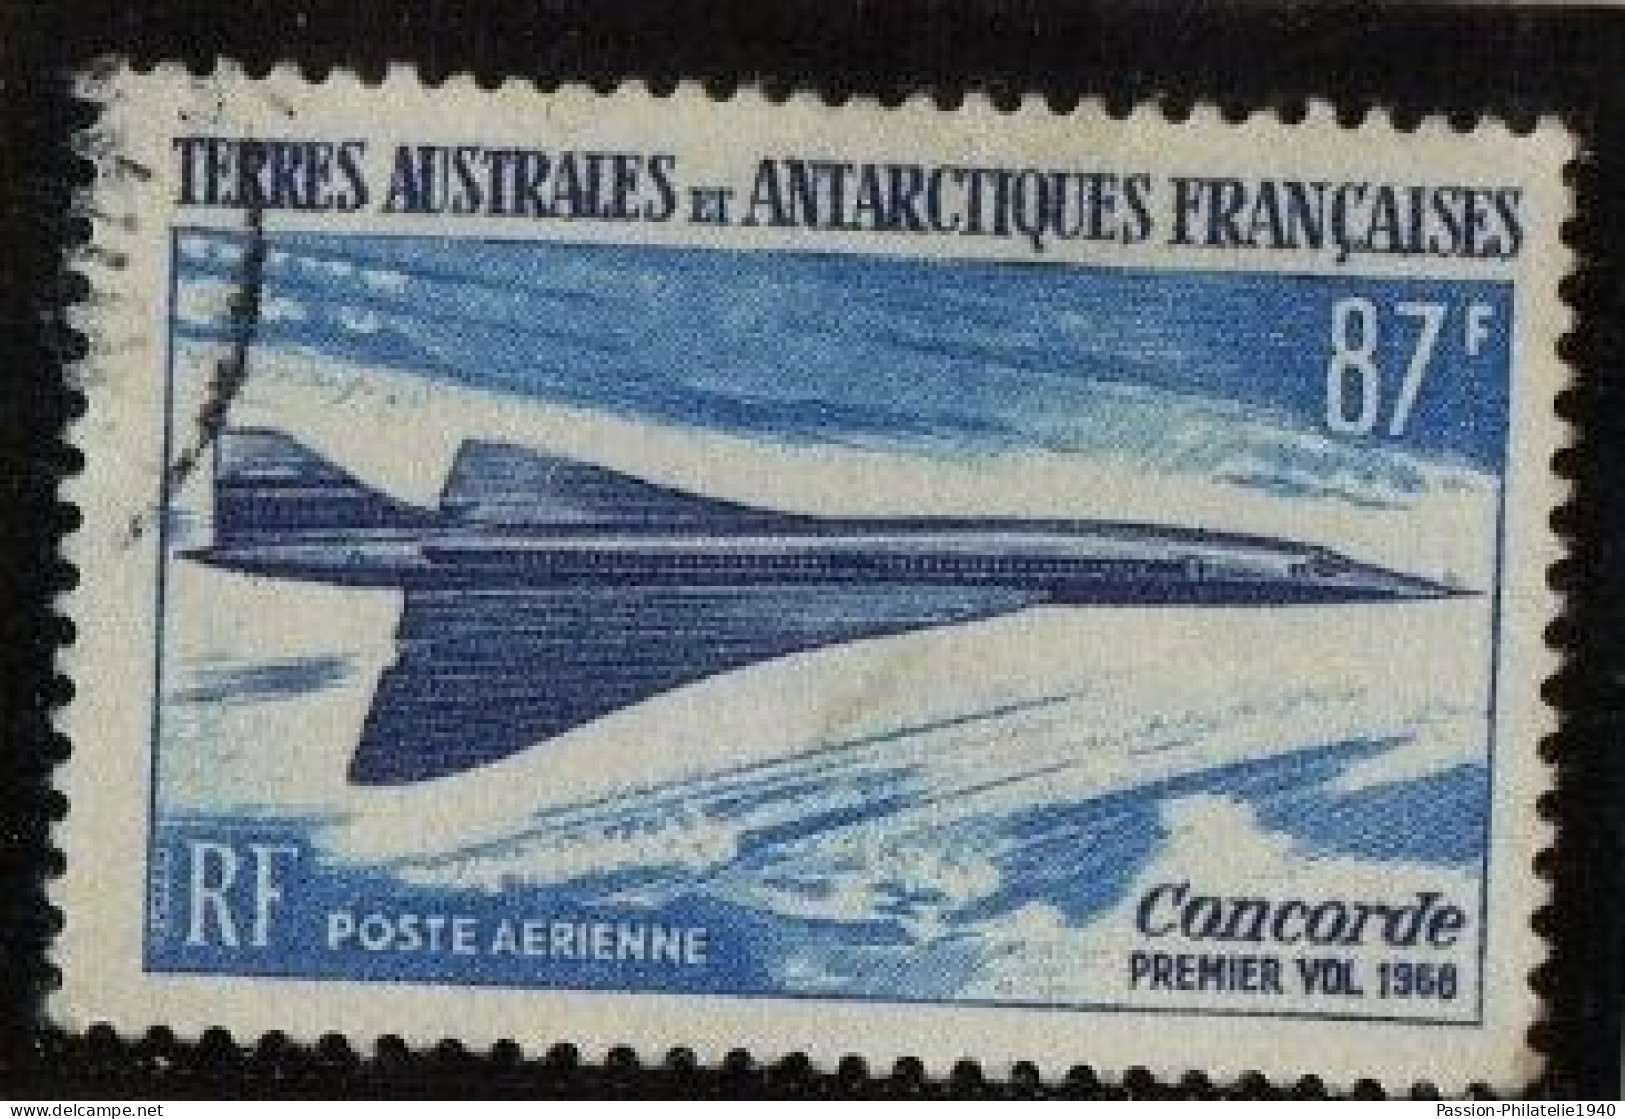 French Antarctica Airmail Nr. 19 Concorde Used Signed Val 87F RR - Used Stamps